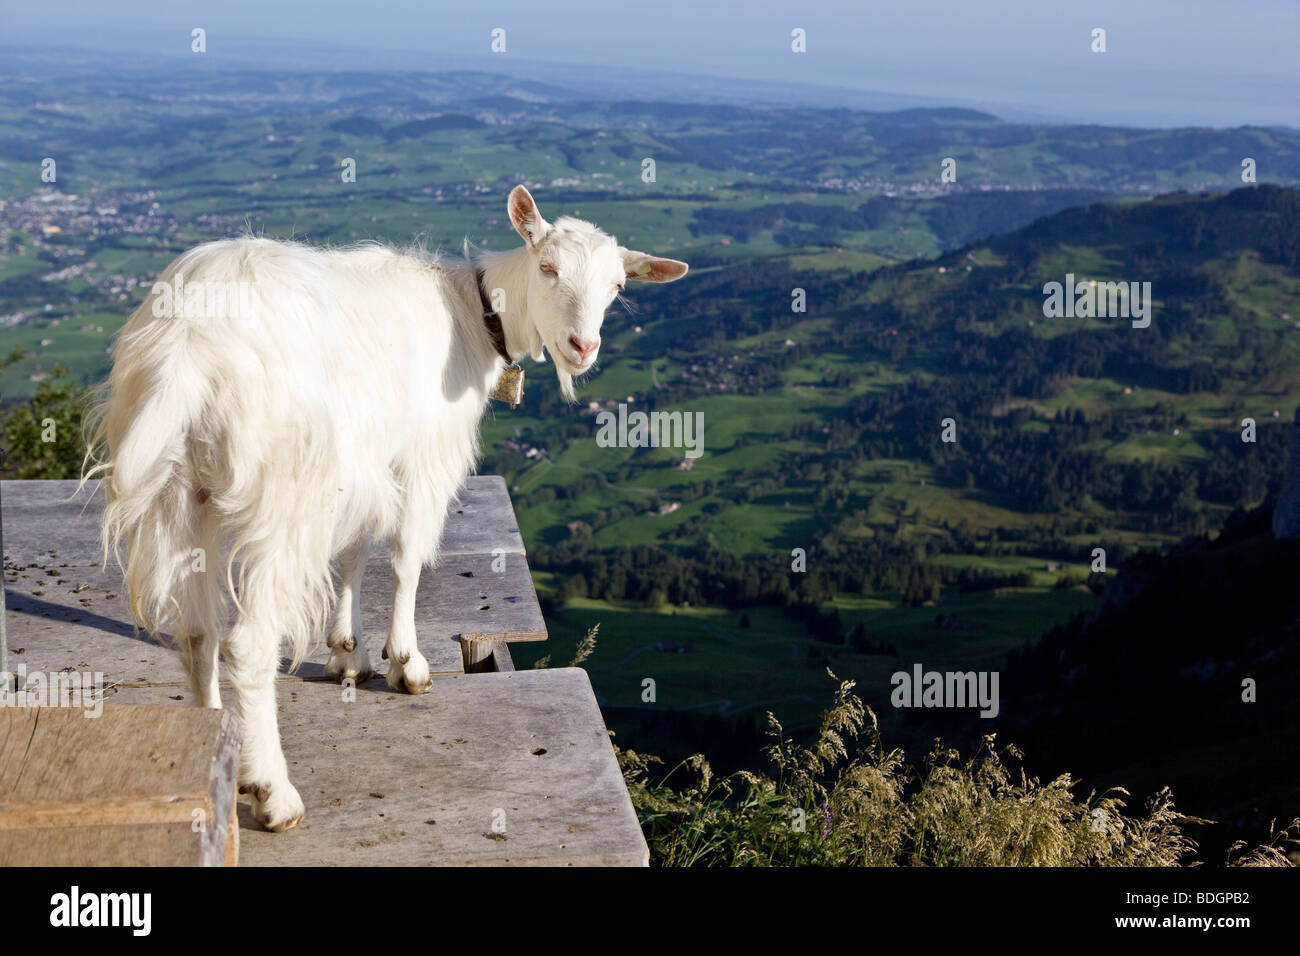 White goat in a risky position overlooking the Appenzell hilly landscape far below Switzerland Stock Photo